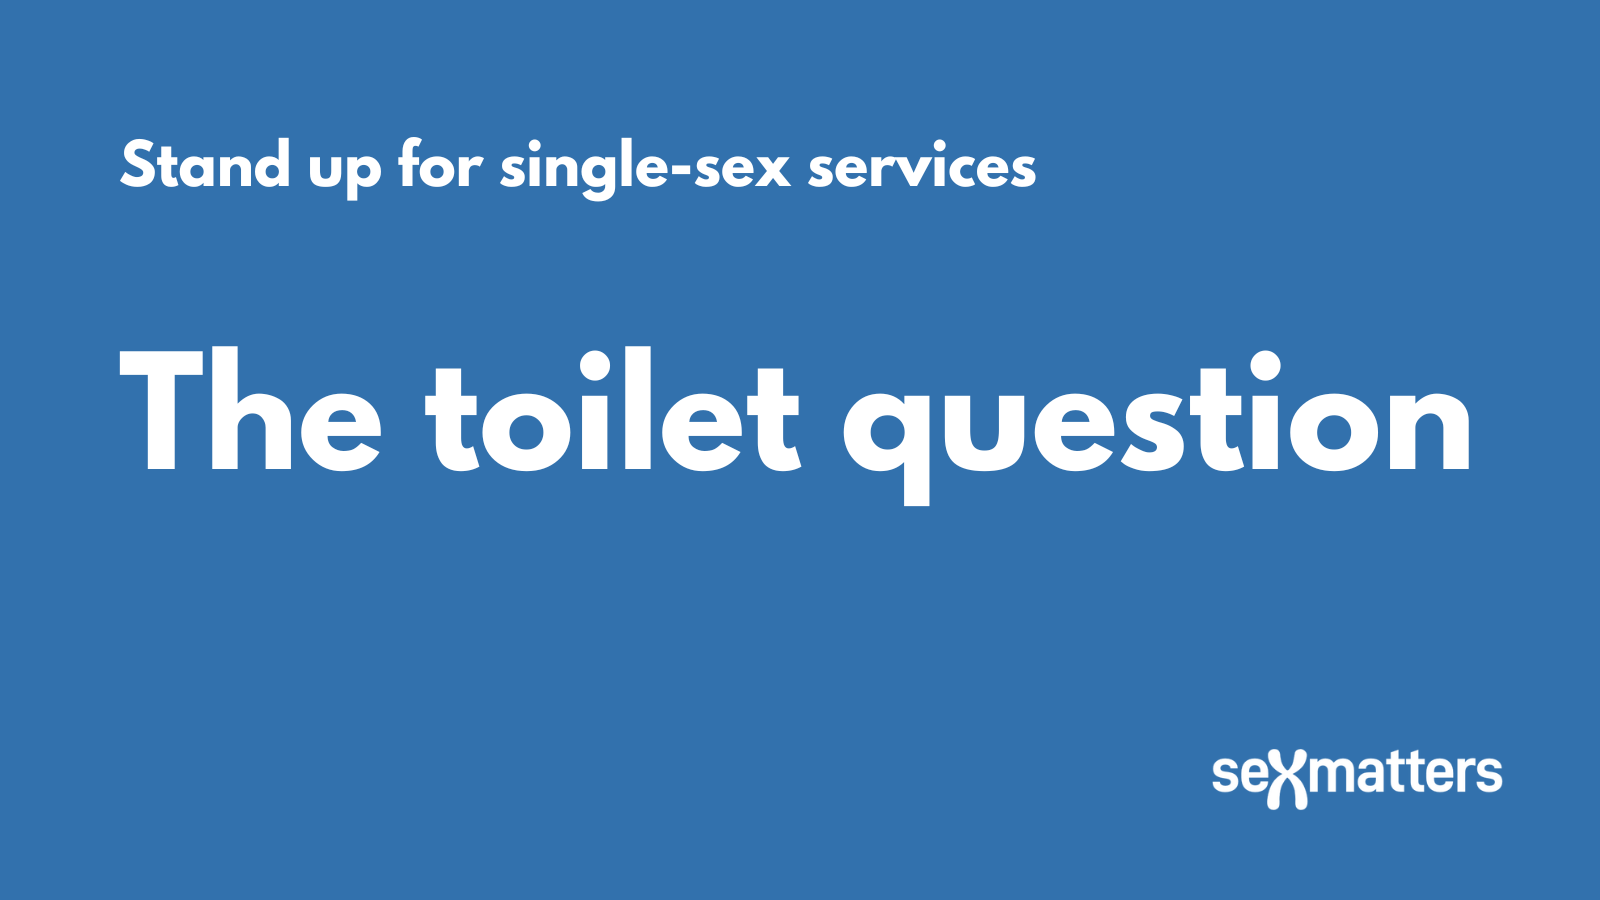 The toilet question